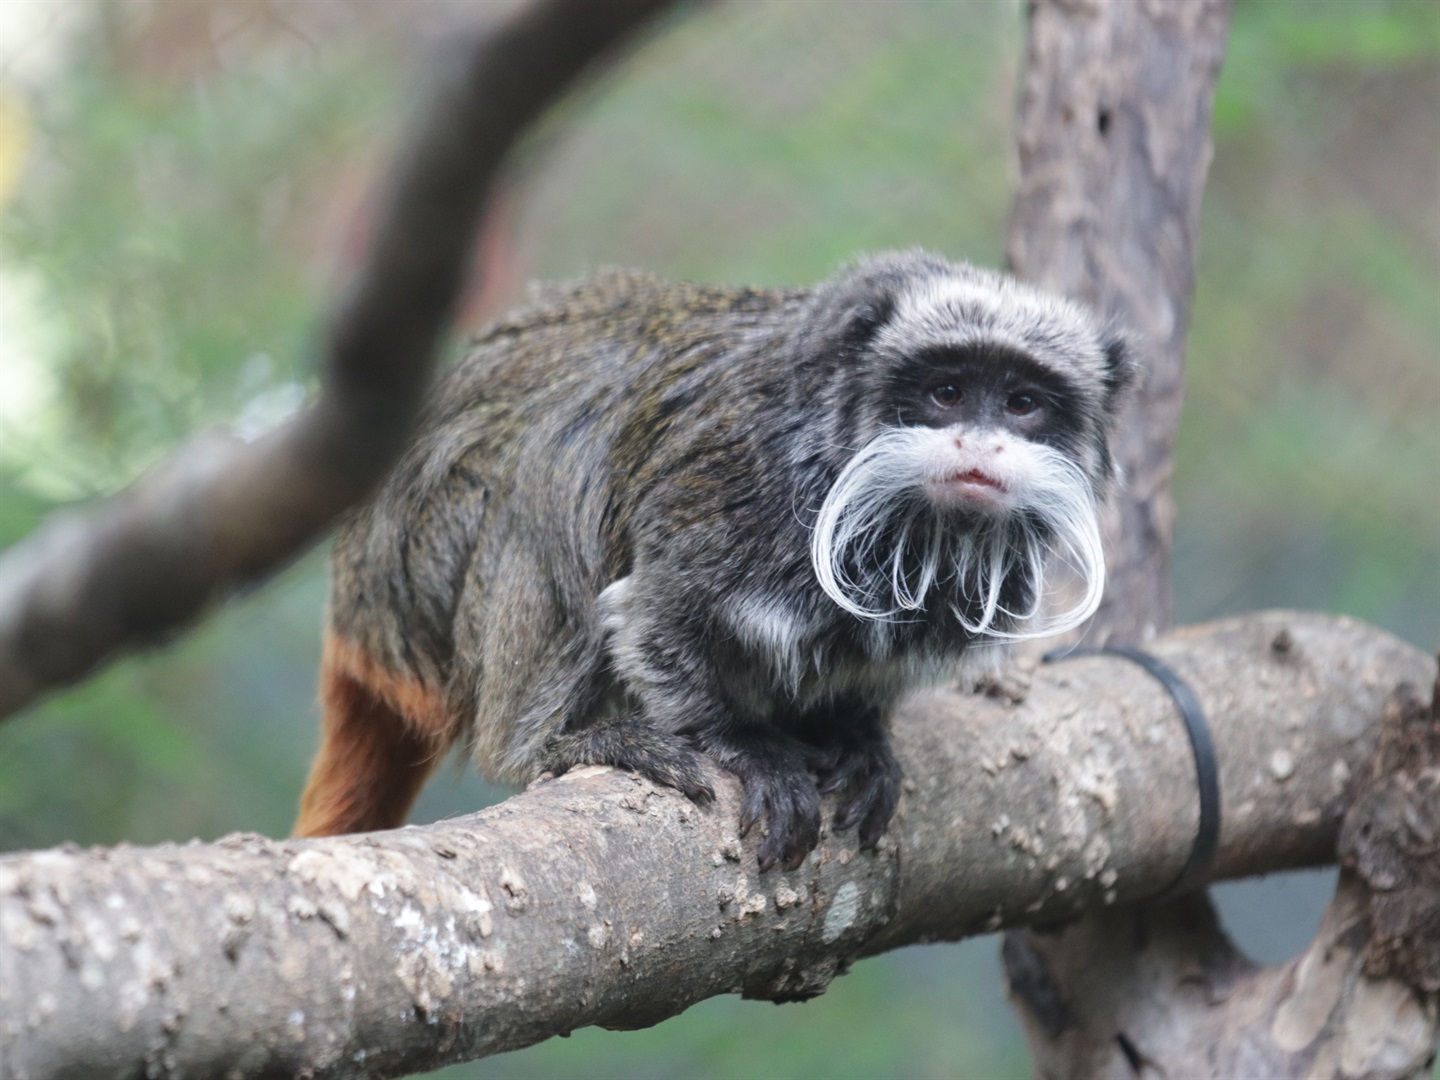 Businessinsider.co.za | The Dallas Zoo's missing monkeys were found inside a closet in an abandoned house, police say